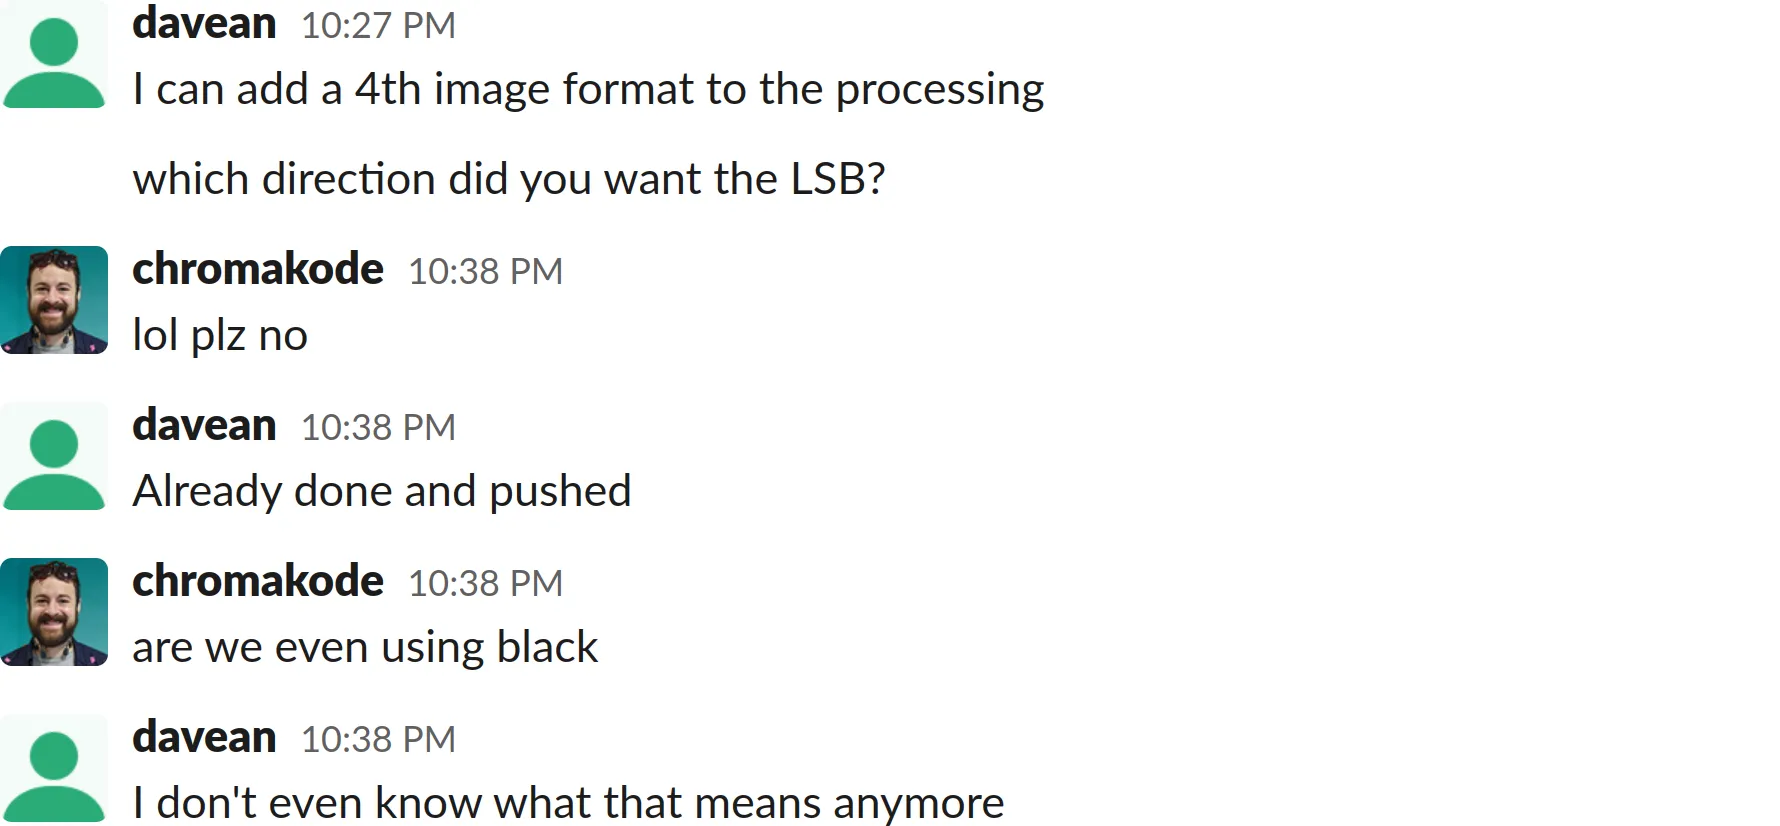 A screenshot of a Slack chat log transcript:
davean: Goddard pushed with the change, will get geoverse rebuilding, but check goddard?
We can go back to that hack ... at least on safari
funny if safari gets the bad color
I can add a 4th image format to the processing
which direction did you want the LSB?
chromakode: lol plz no
davean: Already done and pushed
chromakode: are we even using black
davean: I don't even know what that means anymore